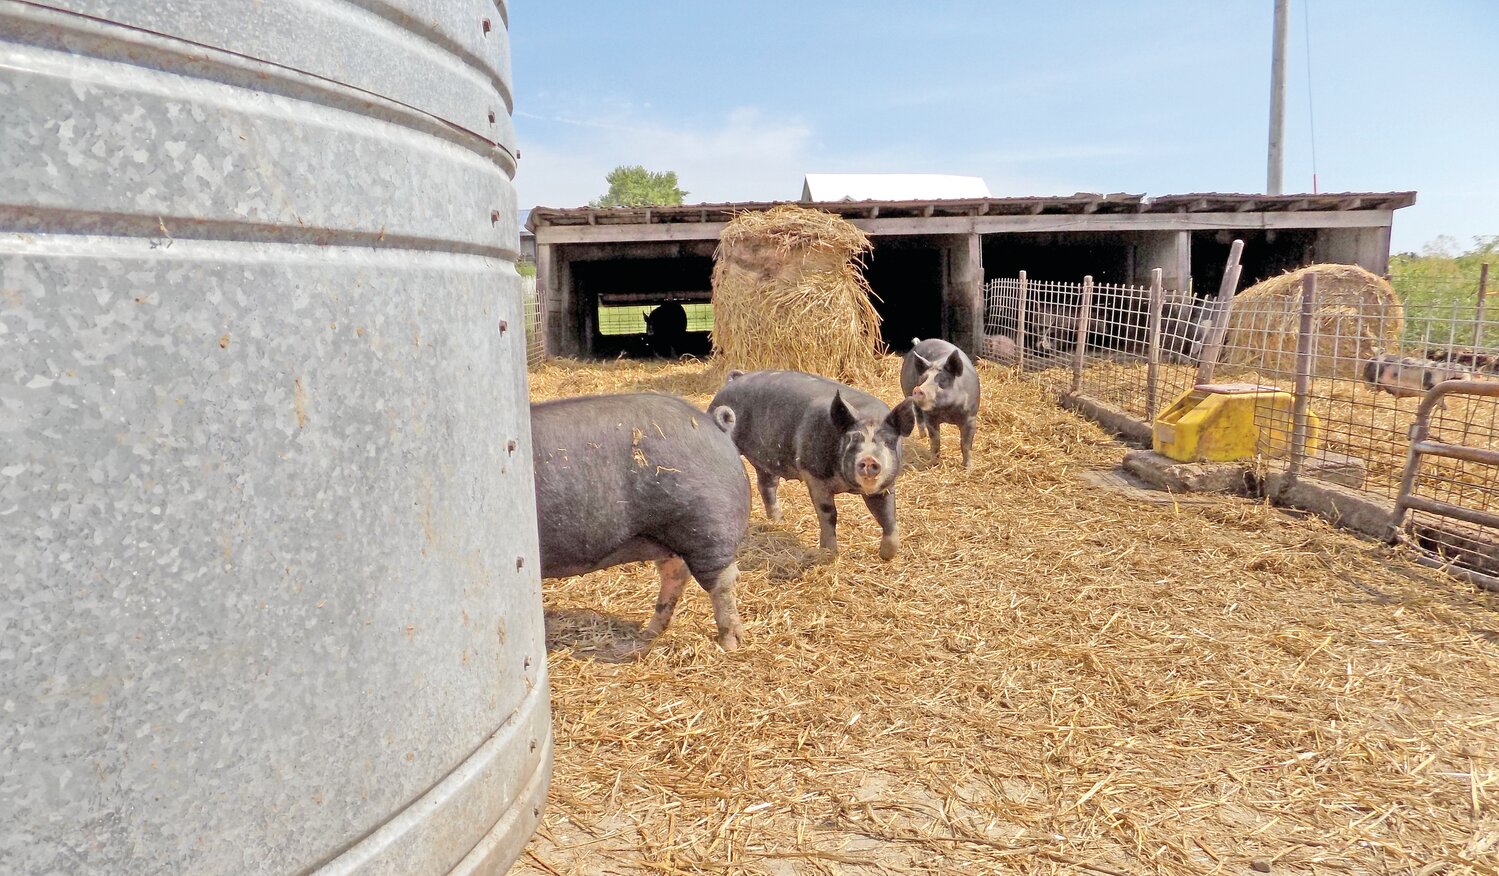 The first stop on the farmstead tour was a visit to these Berkshire pigs, a heritage breed whose meat is especially tasty.